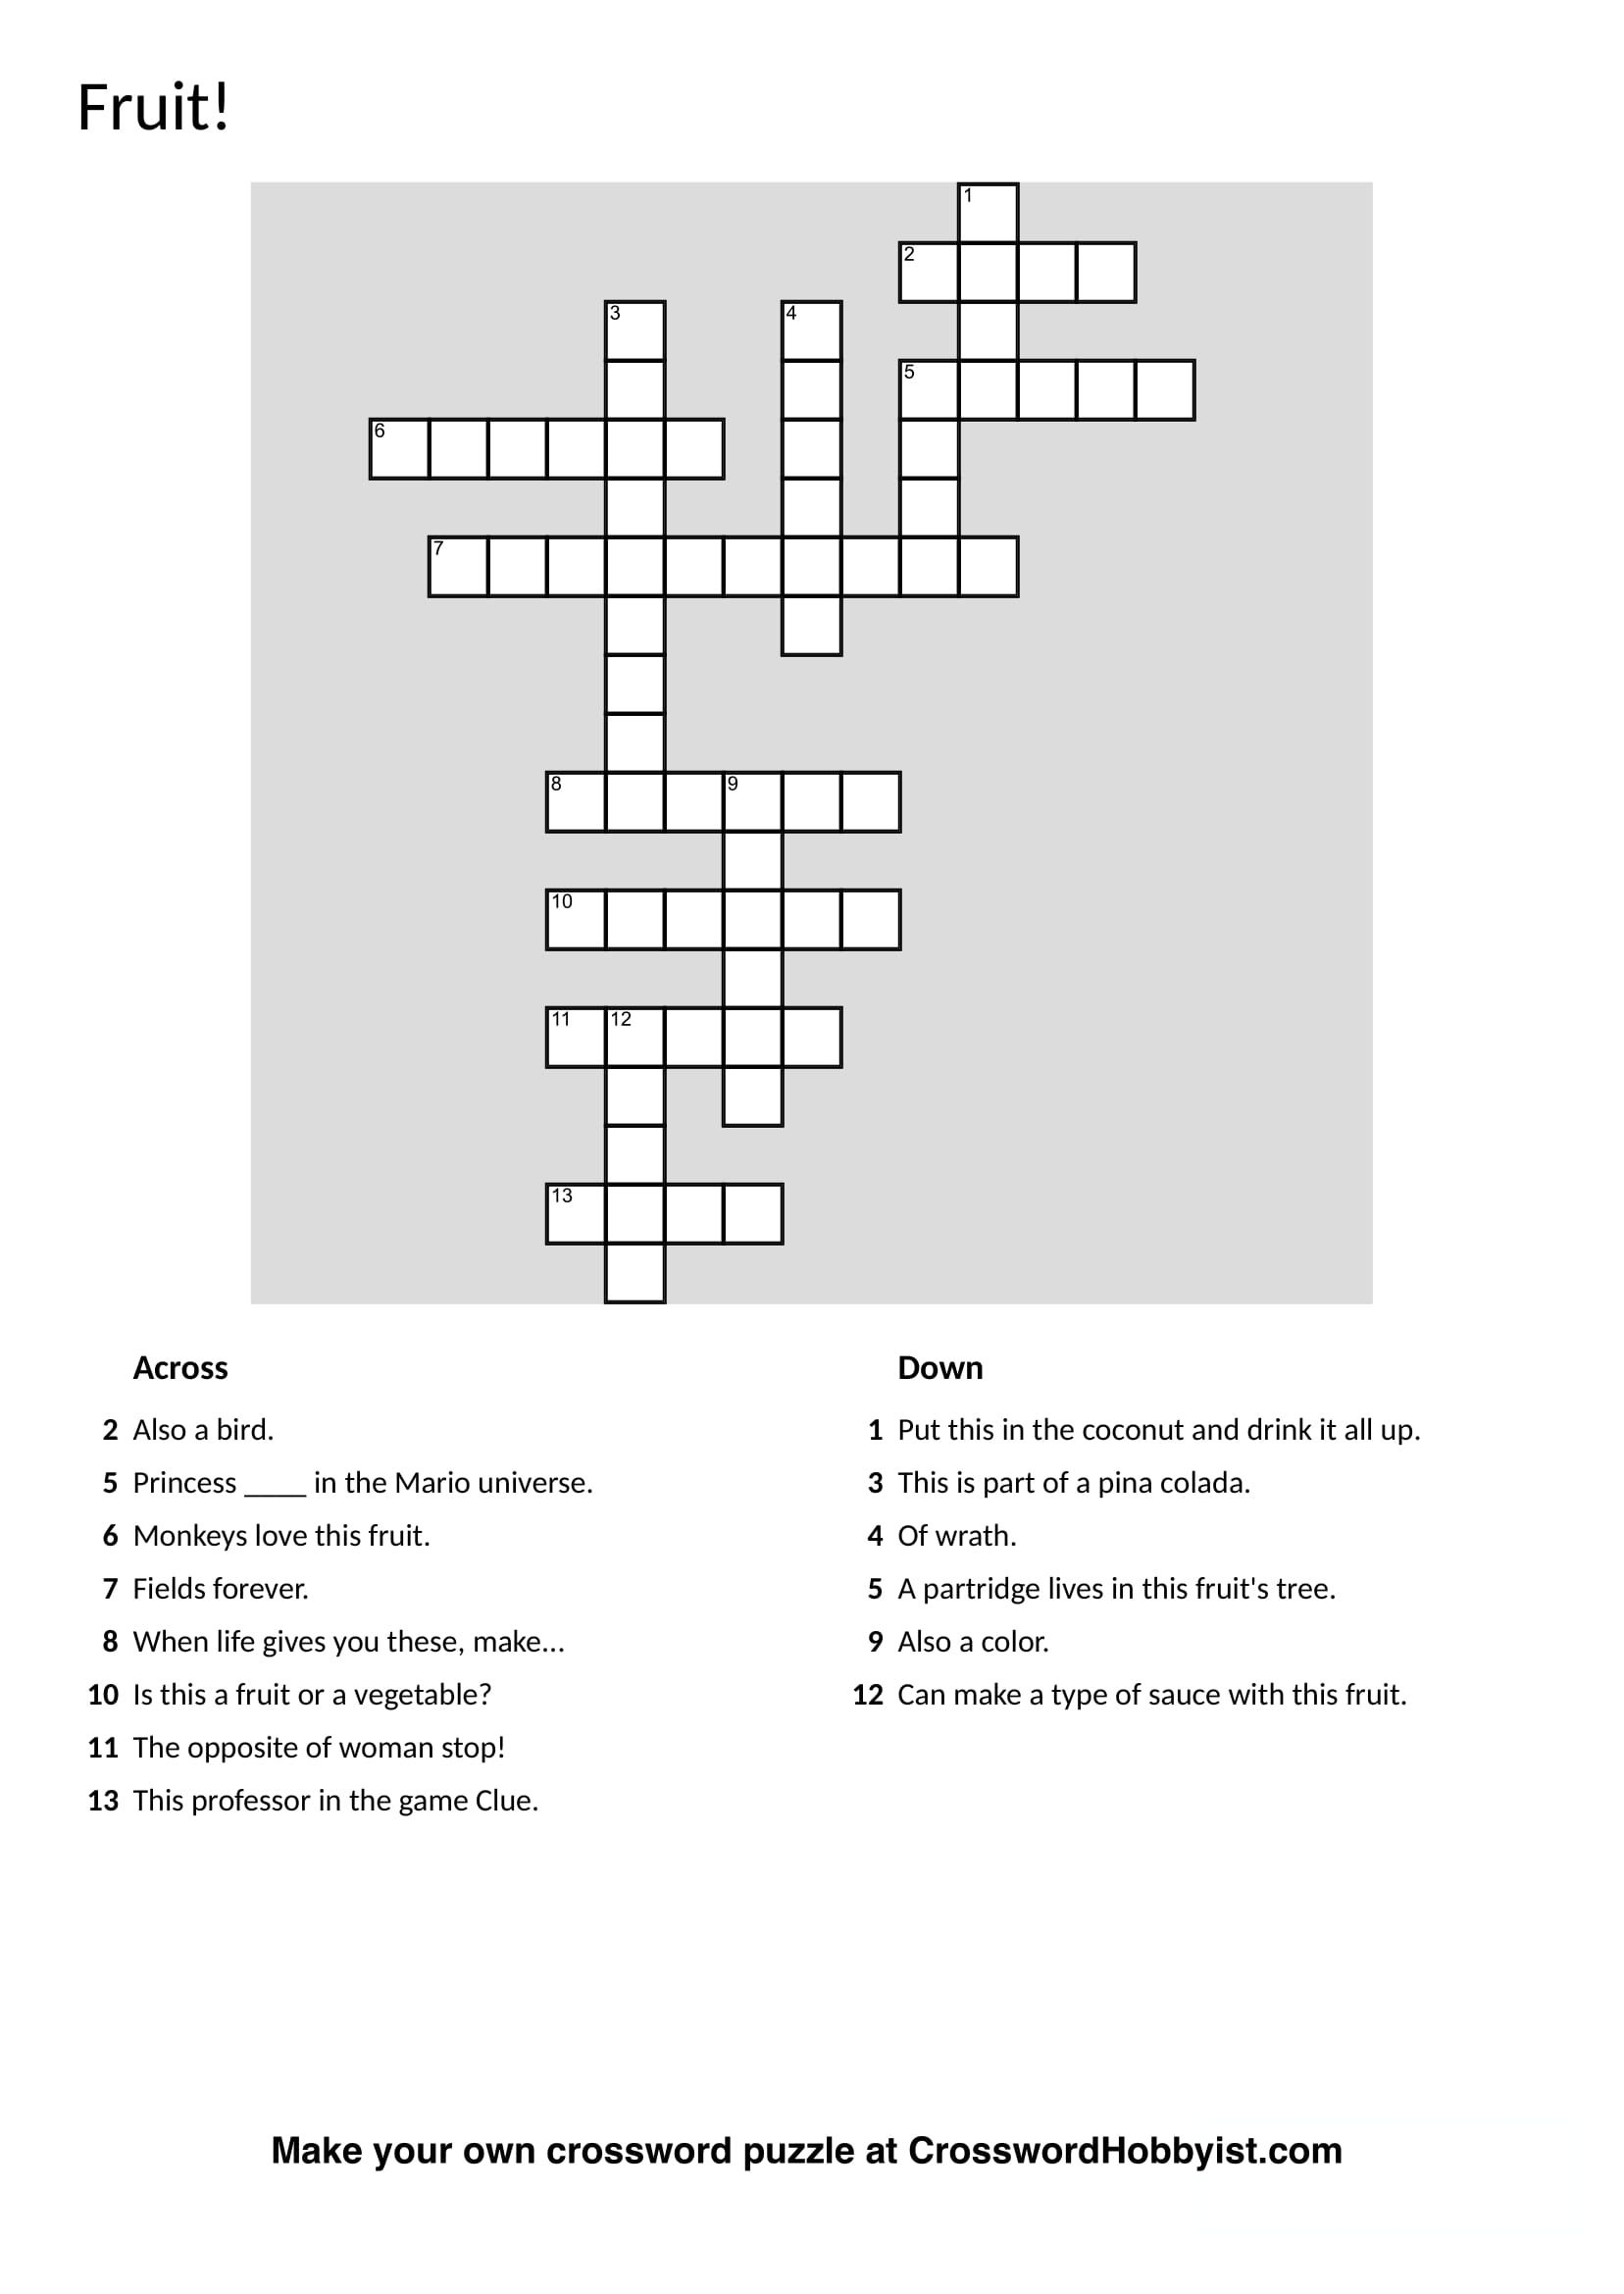 Make Your Own Fun Crossword Puzzles With Crosswordhobbyist - Make Your Own Crossword Puzzle Printable